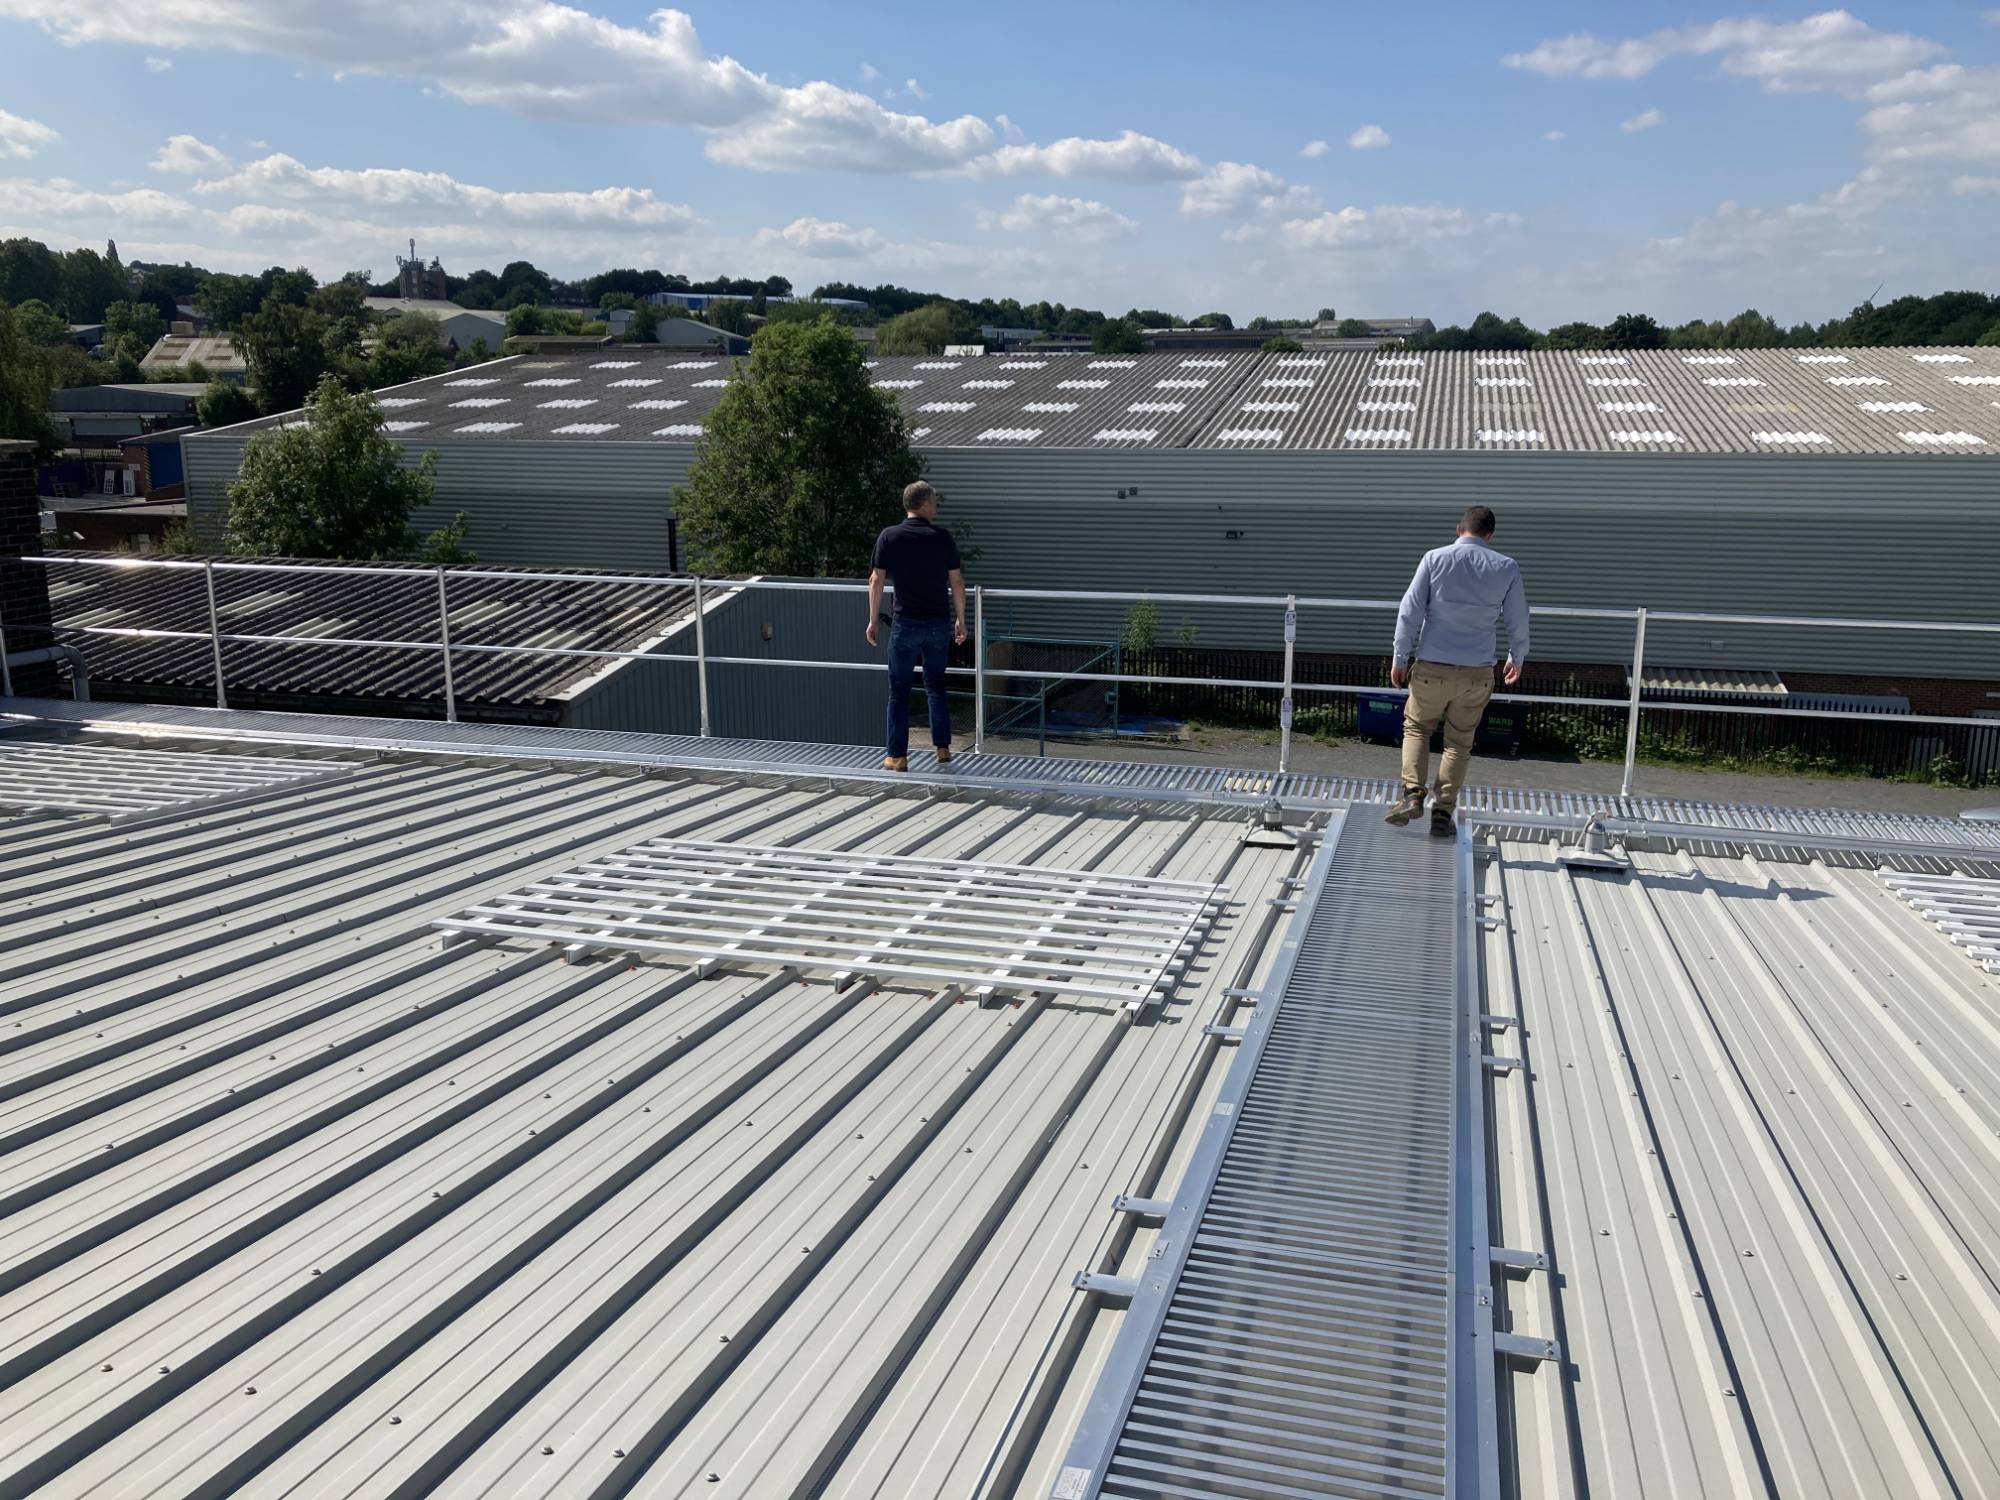 Working Platform And Walkway System - Ascent Aluminium Walkway For Flat / Single Ply Membrane Roofs